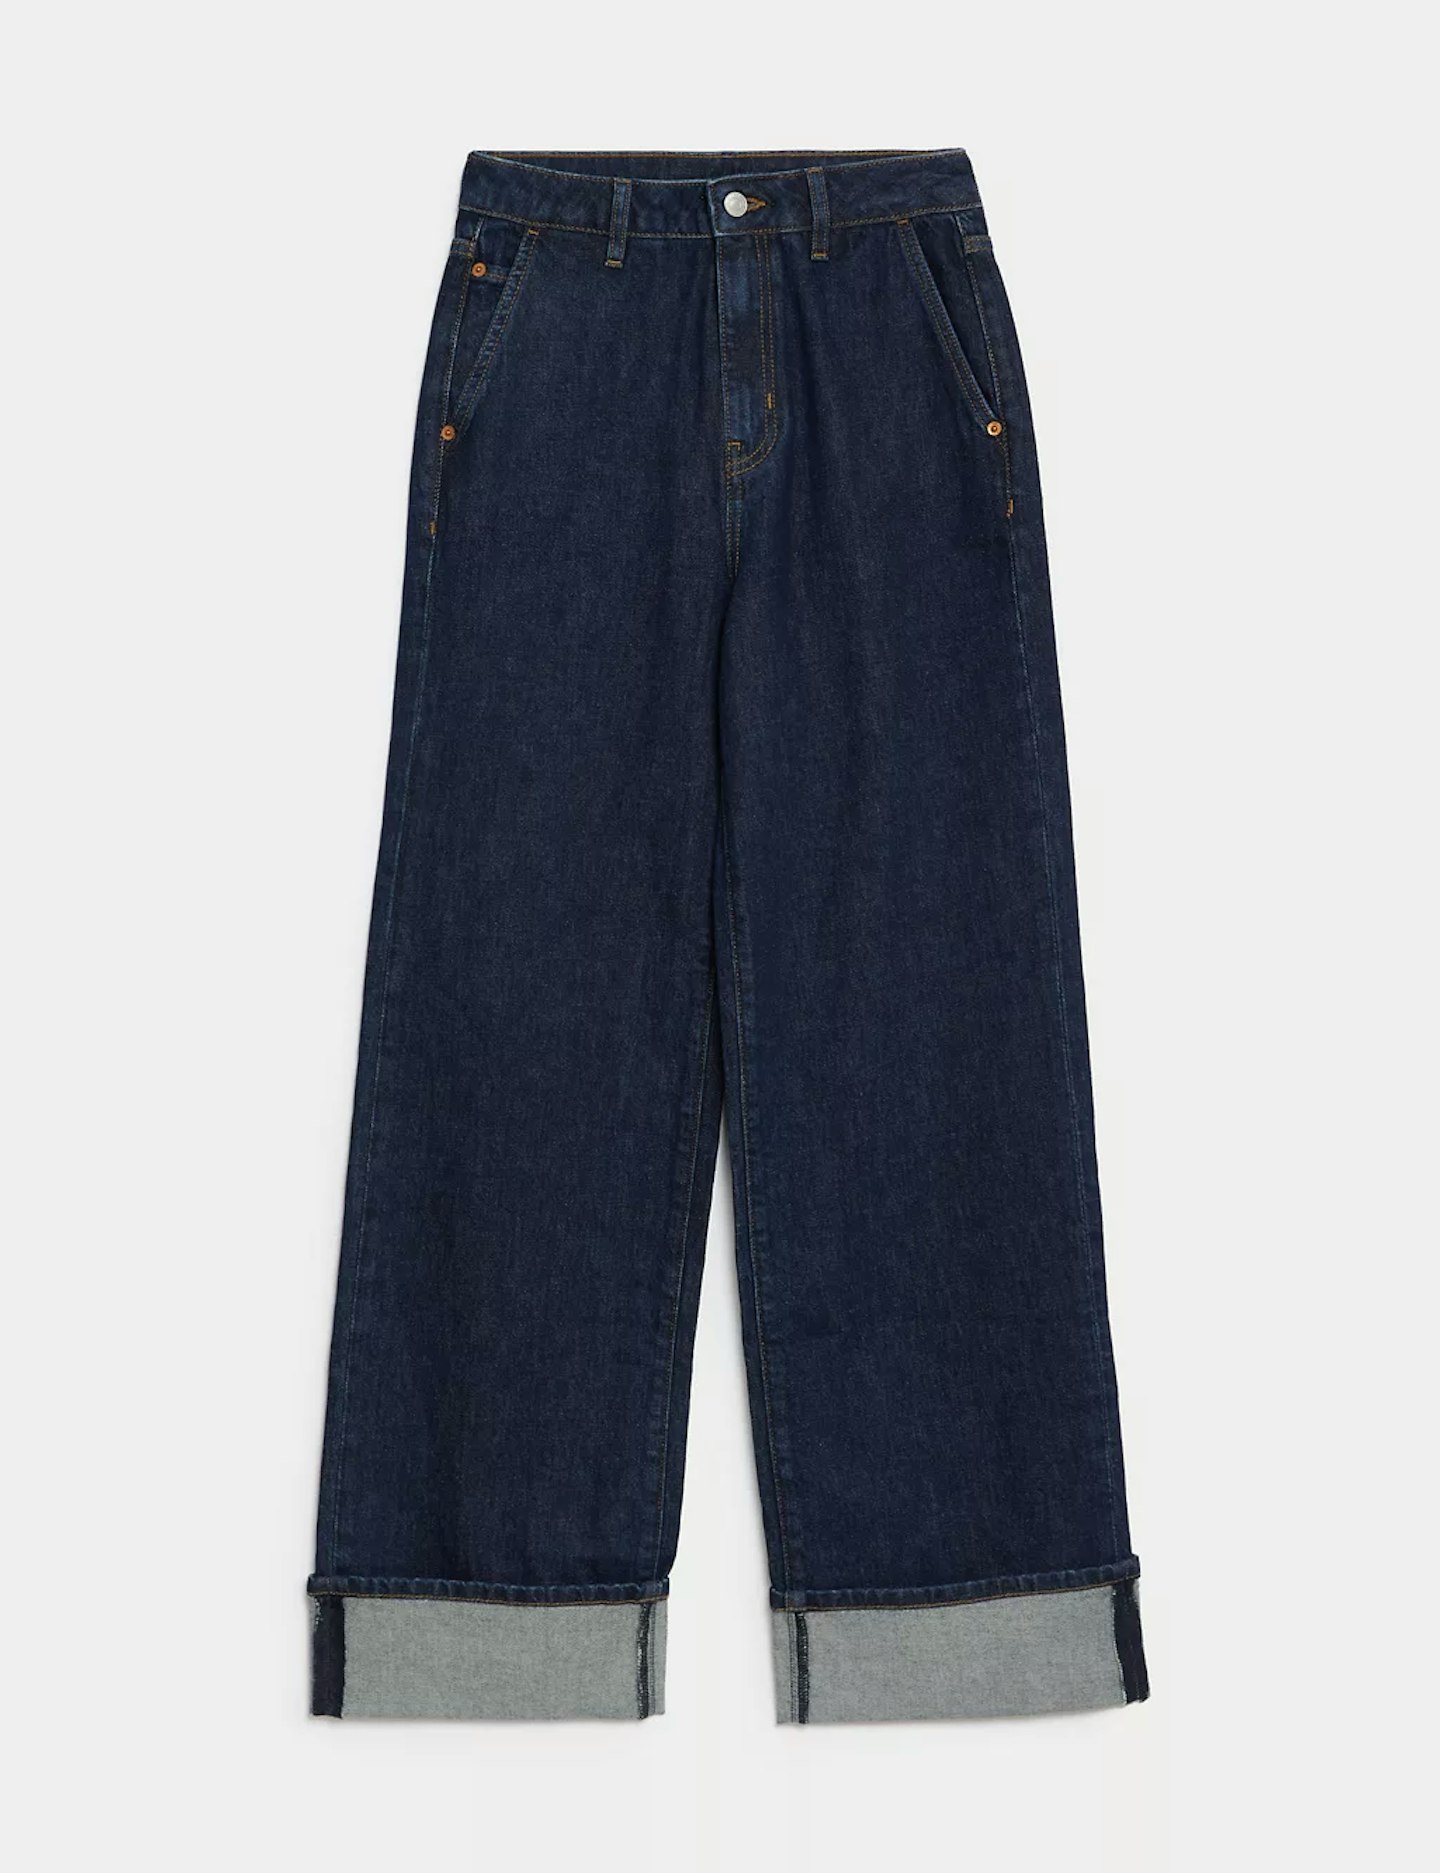 M&S, High-Waisted Slim Wide-Leg Turn-Up Jeans